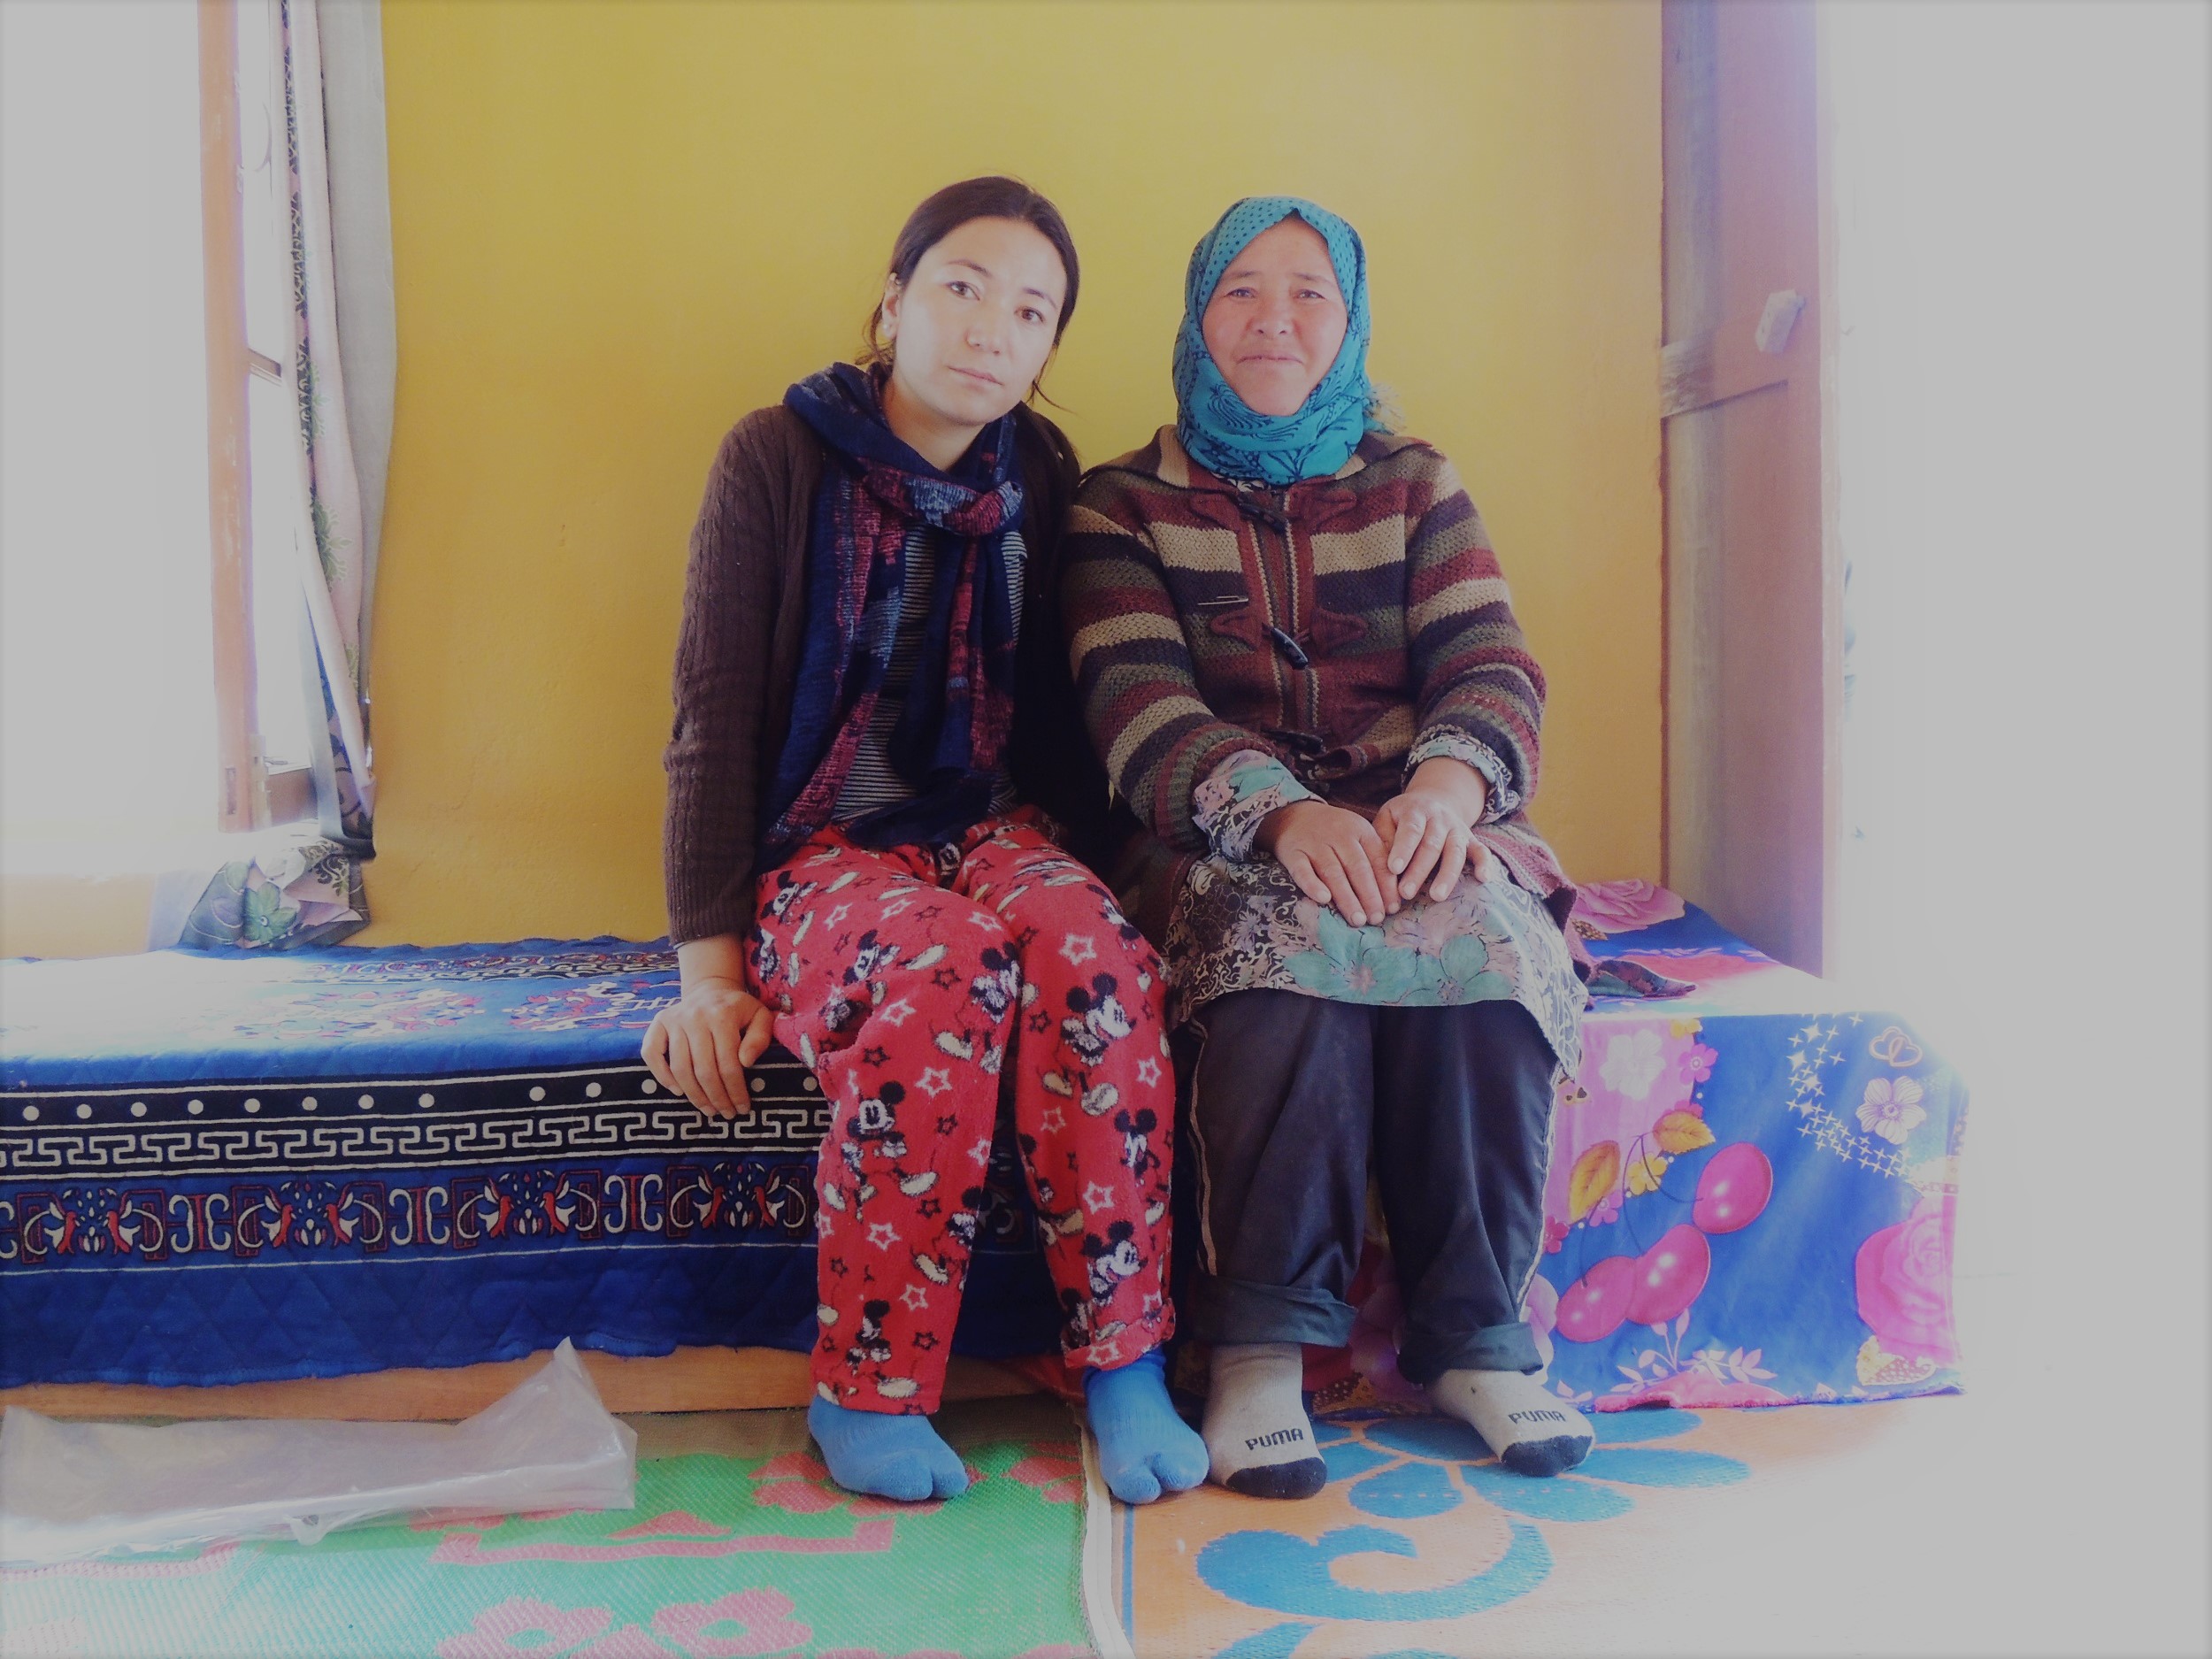 Padma Yangdol (left) grew up here in Markha Valley. She runs the new women’s café in Kaya during summer: “Together with tourism, the café is the only source of income in the region and an opportunity for rural women to gain more independency.” Padma wants to work as a trekking guide one day.